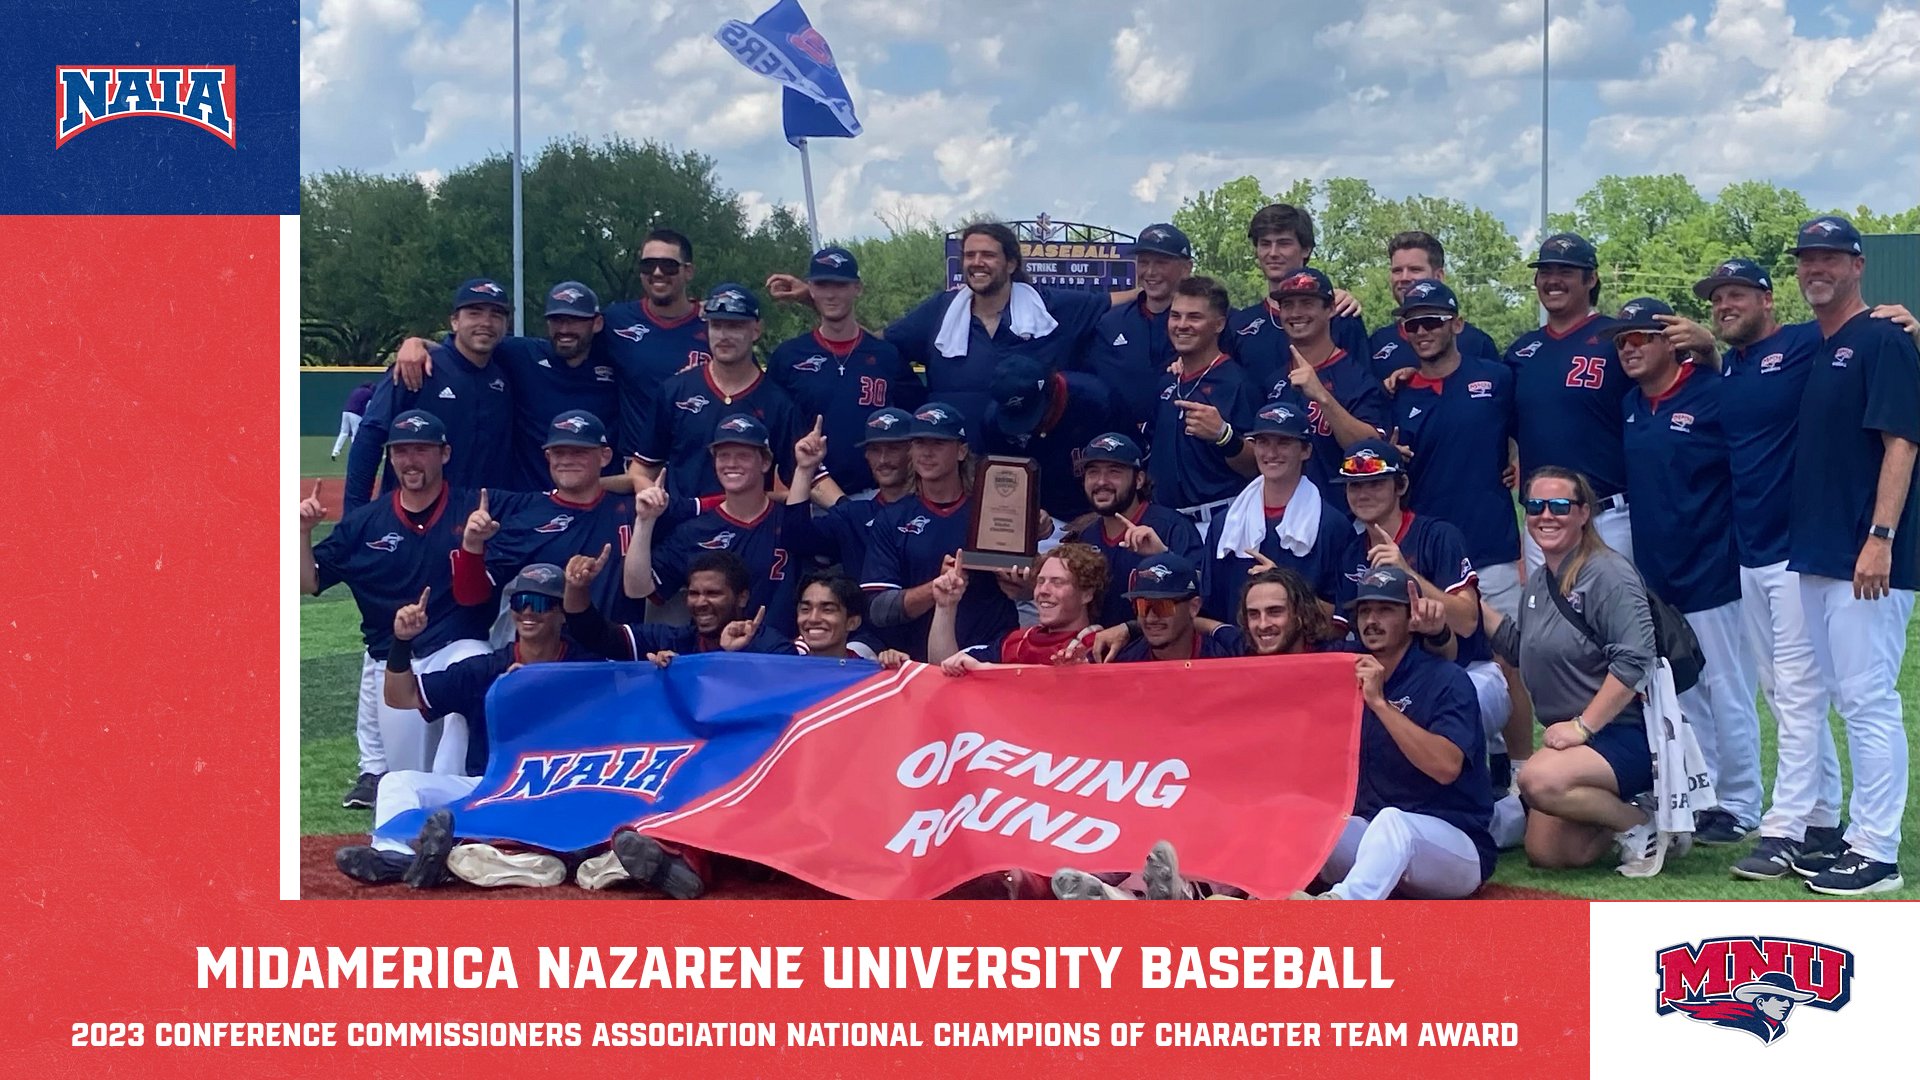 MidAmerica Nazarene Baseball Selected 2023 Conference Commissioners Association National Champions of Character Team Award